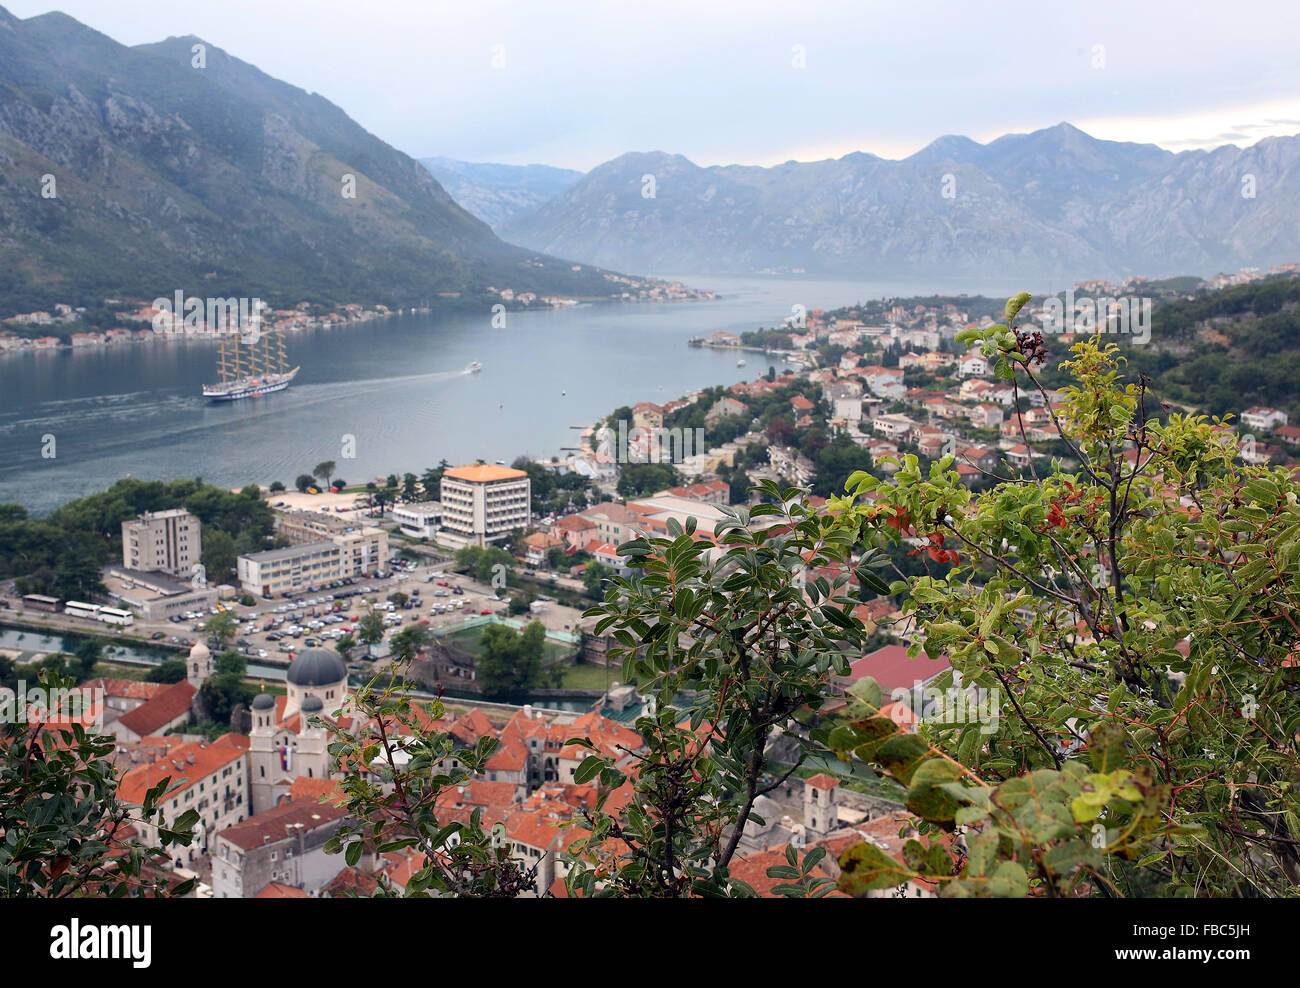 Tall ship pictured in the Bay of Kotor alongside the medieval port town of Kotor in Montenegró Stock Photo